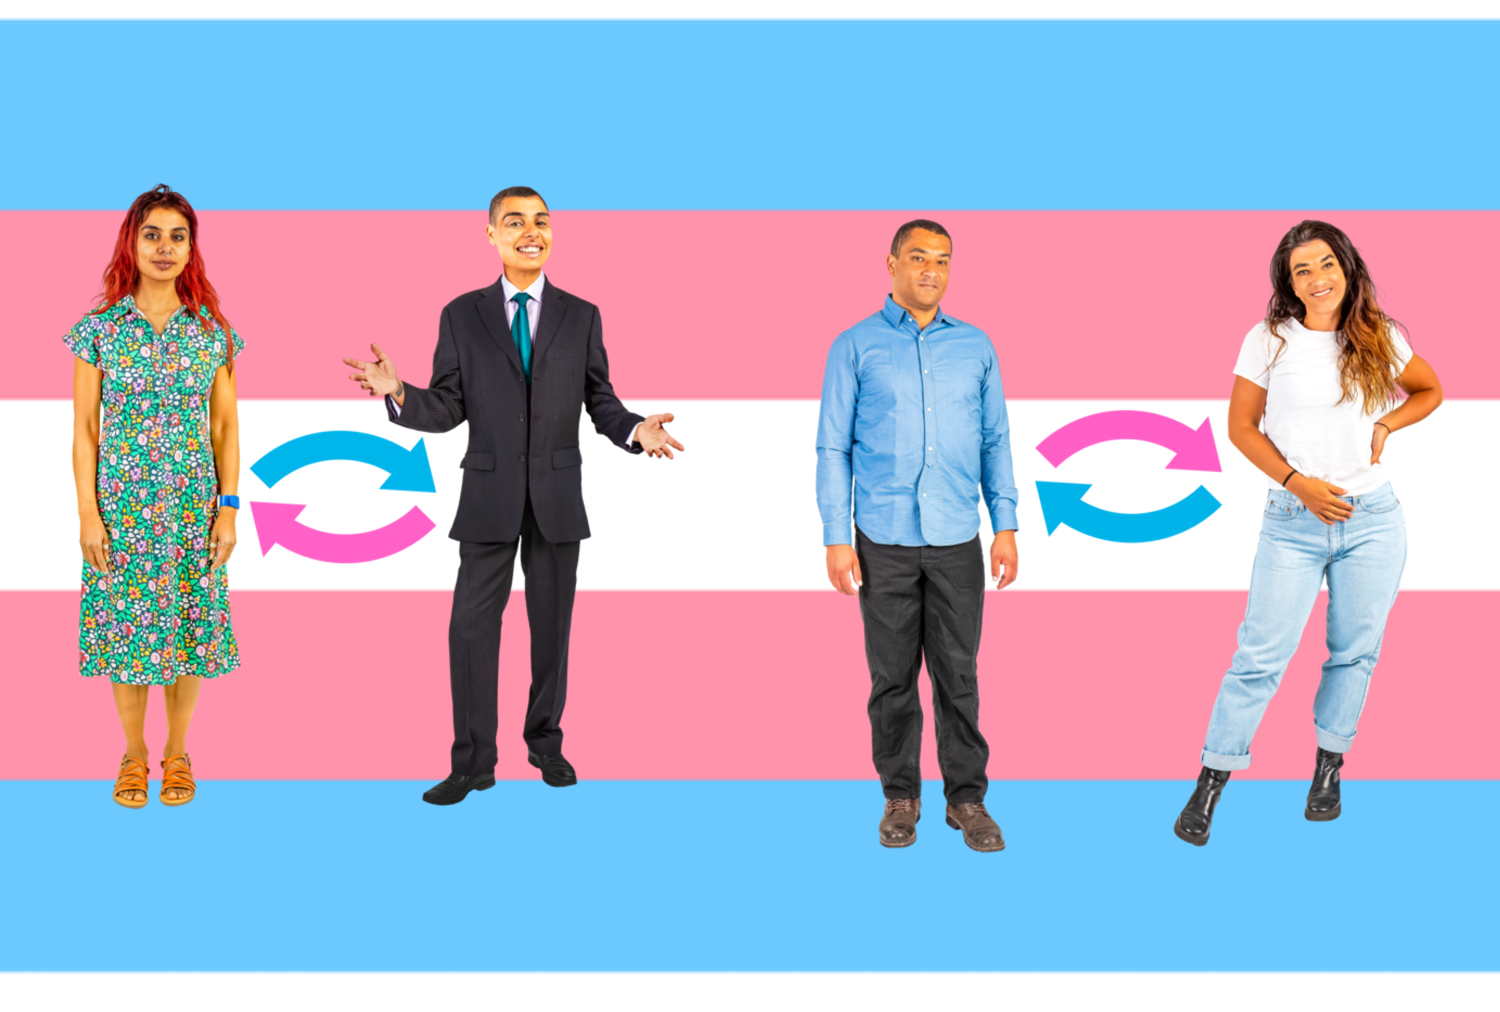 A woman next to a man, and a man next to a woman, with the transgender flag behind them